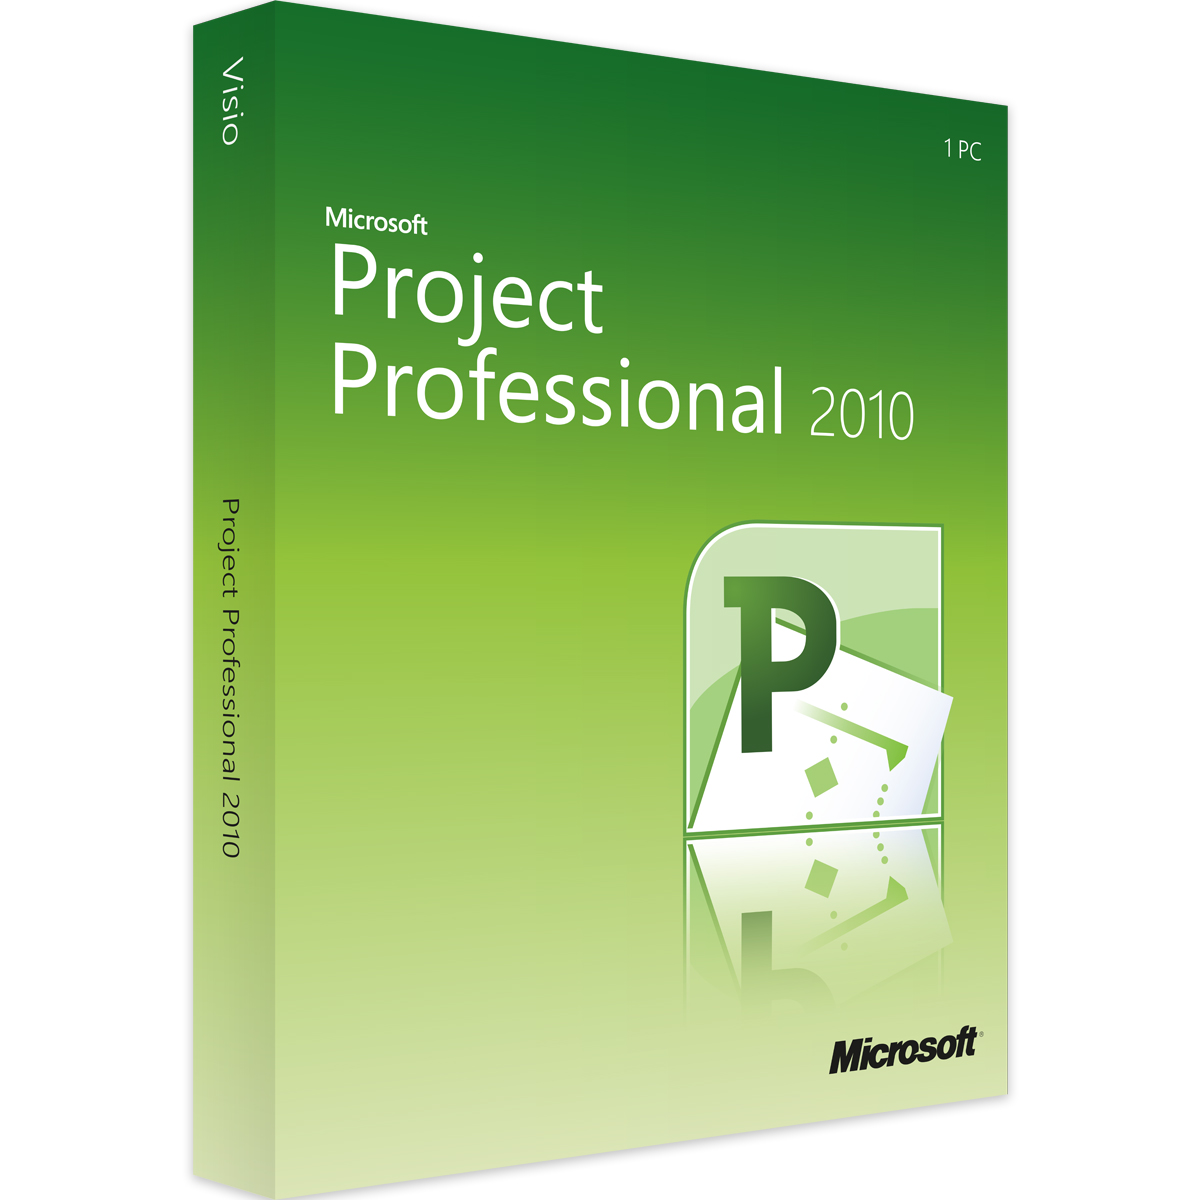 Ms Project Professional 2010 Product Key Generator